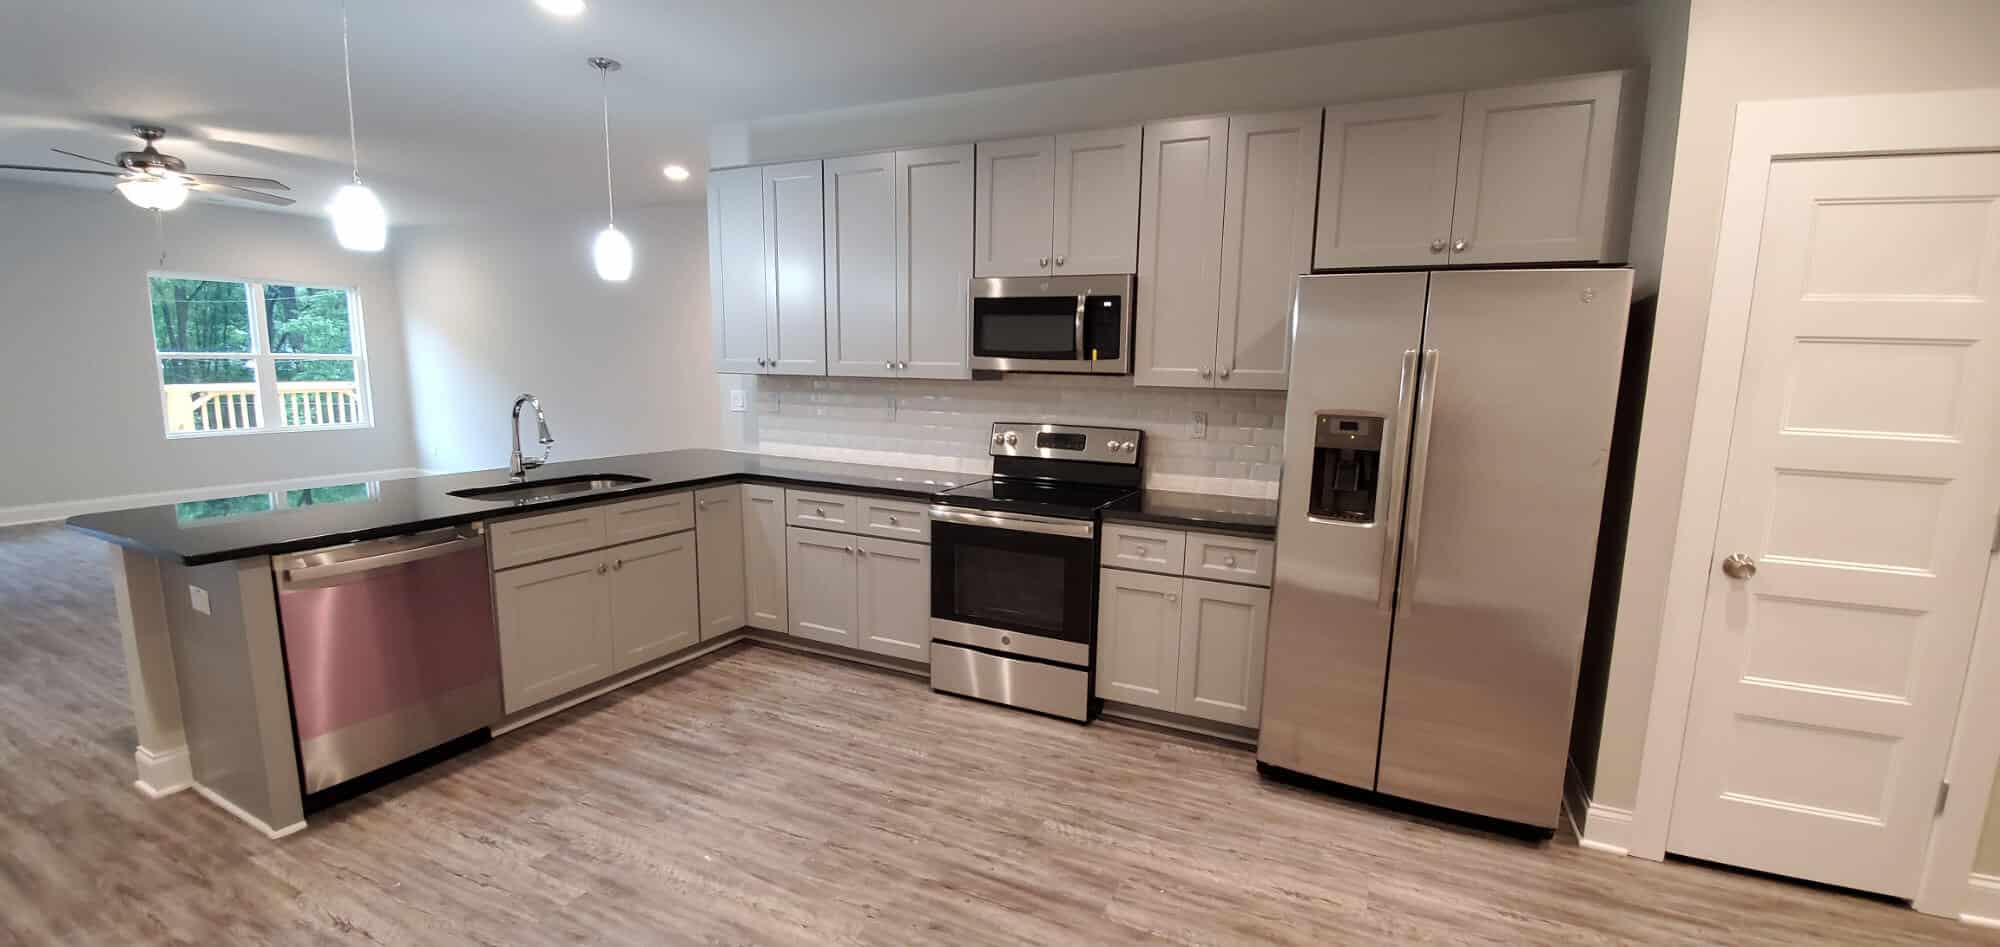 raleigh off campus apartments marcom st off campus apartments near nc state university full kitchen plank wood flooring